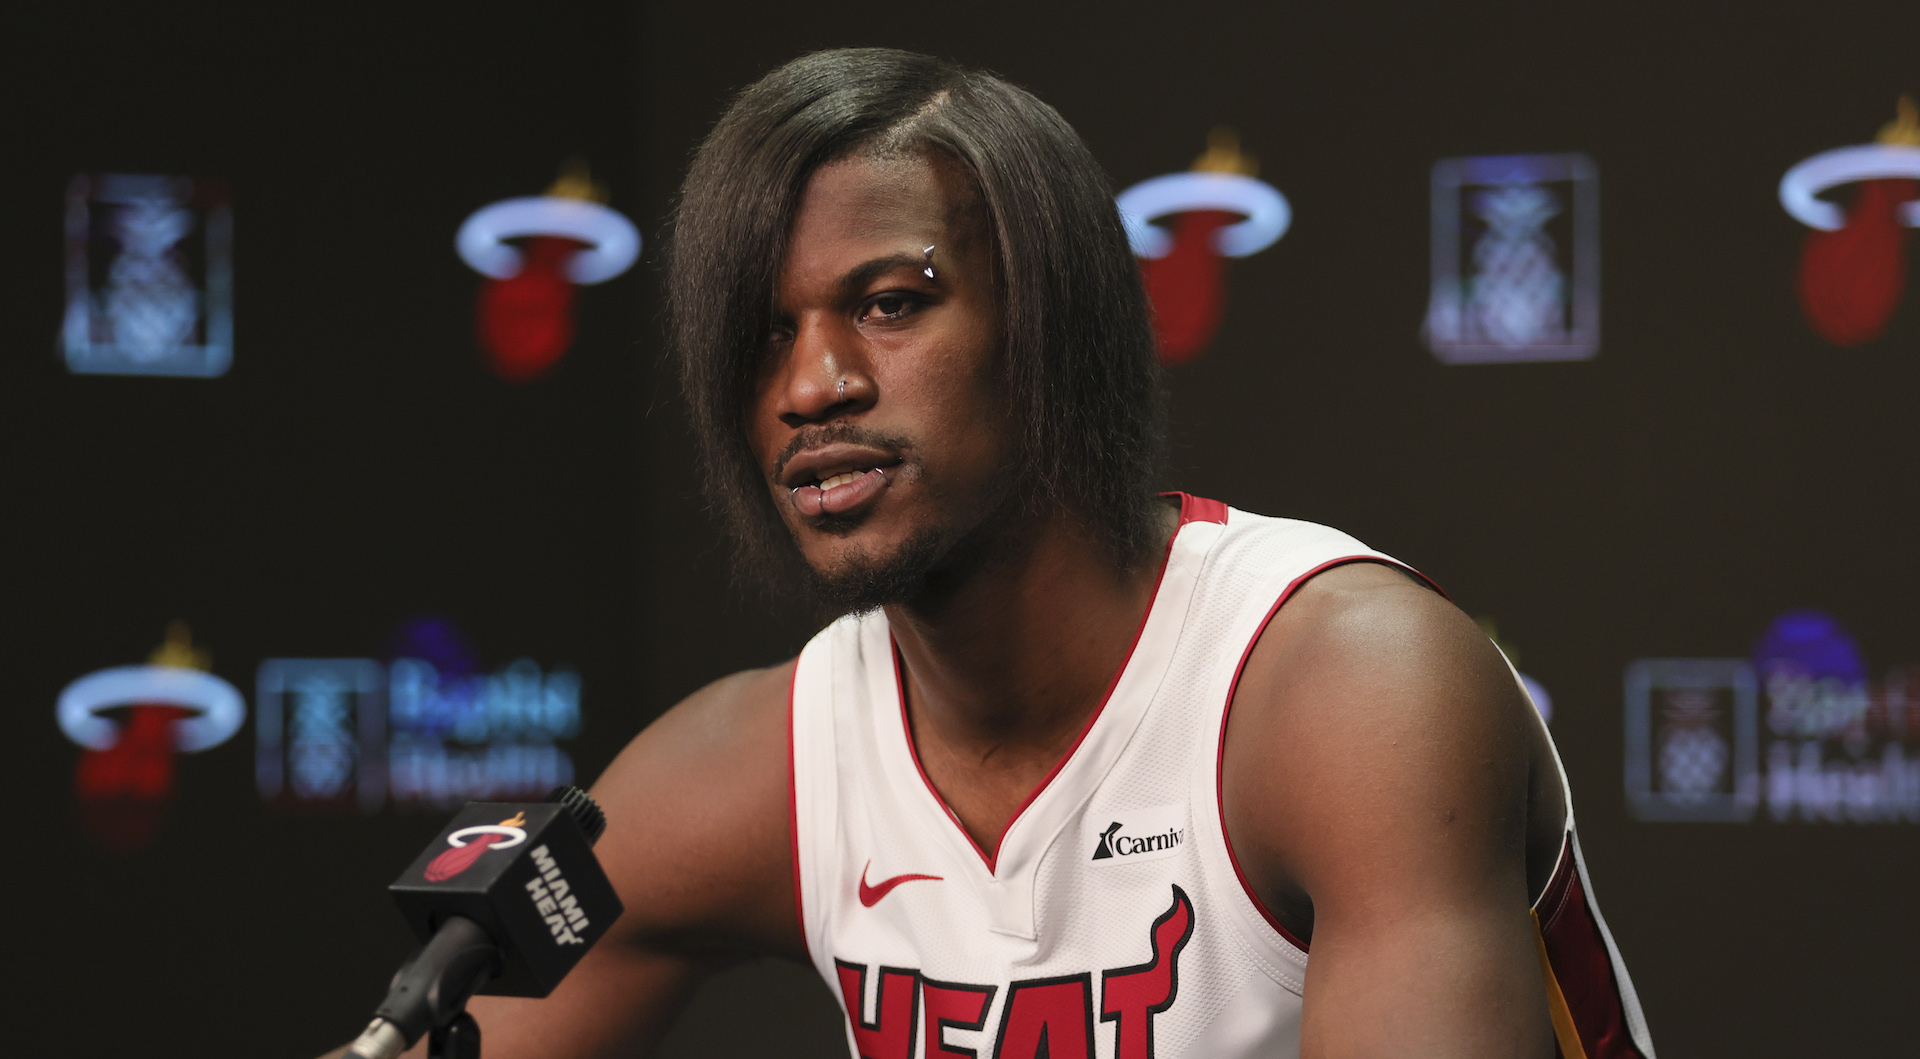 Jimmy Butler Rocks Emo Look With Straightened Hair and Piercings